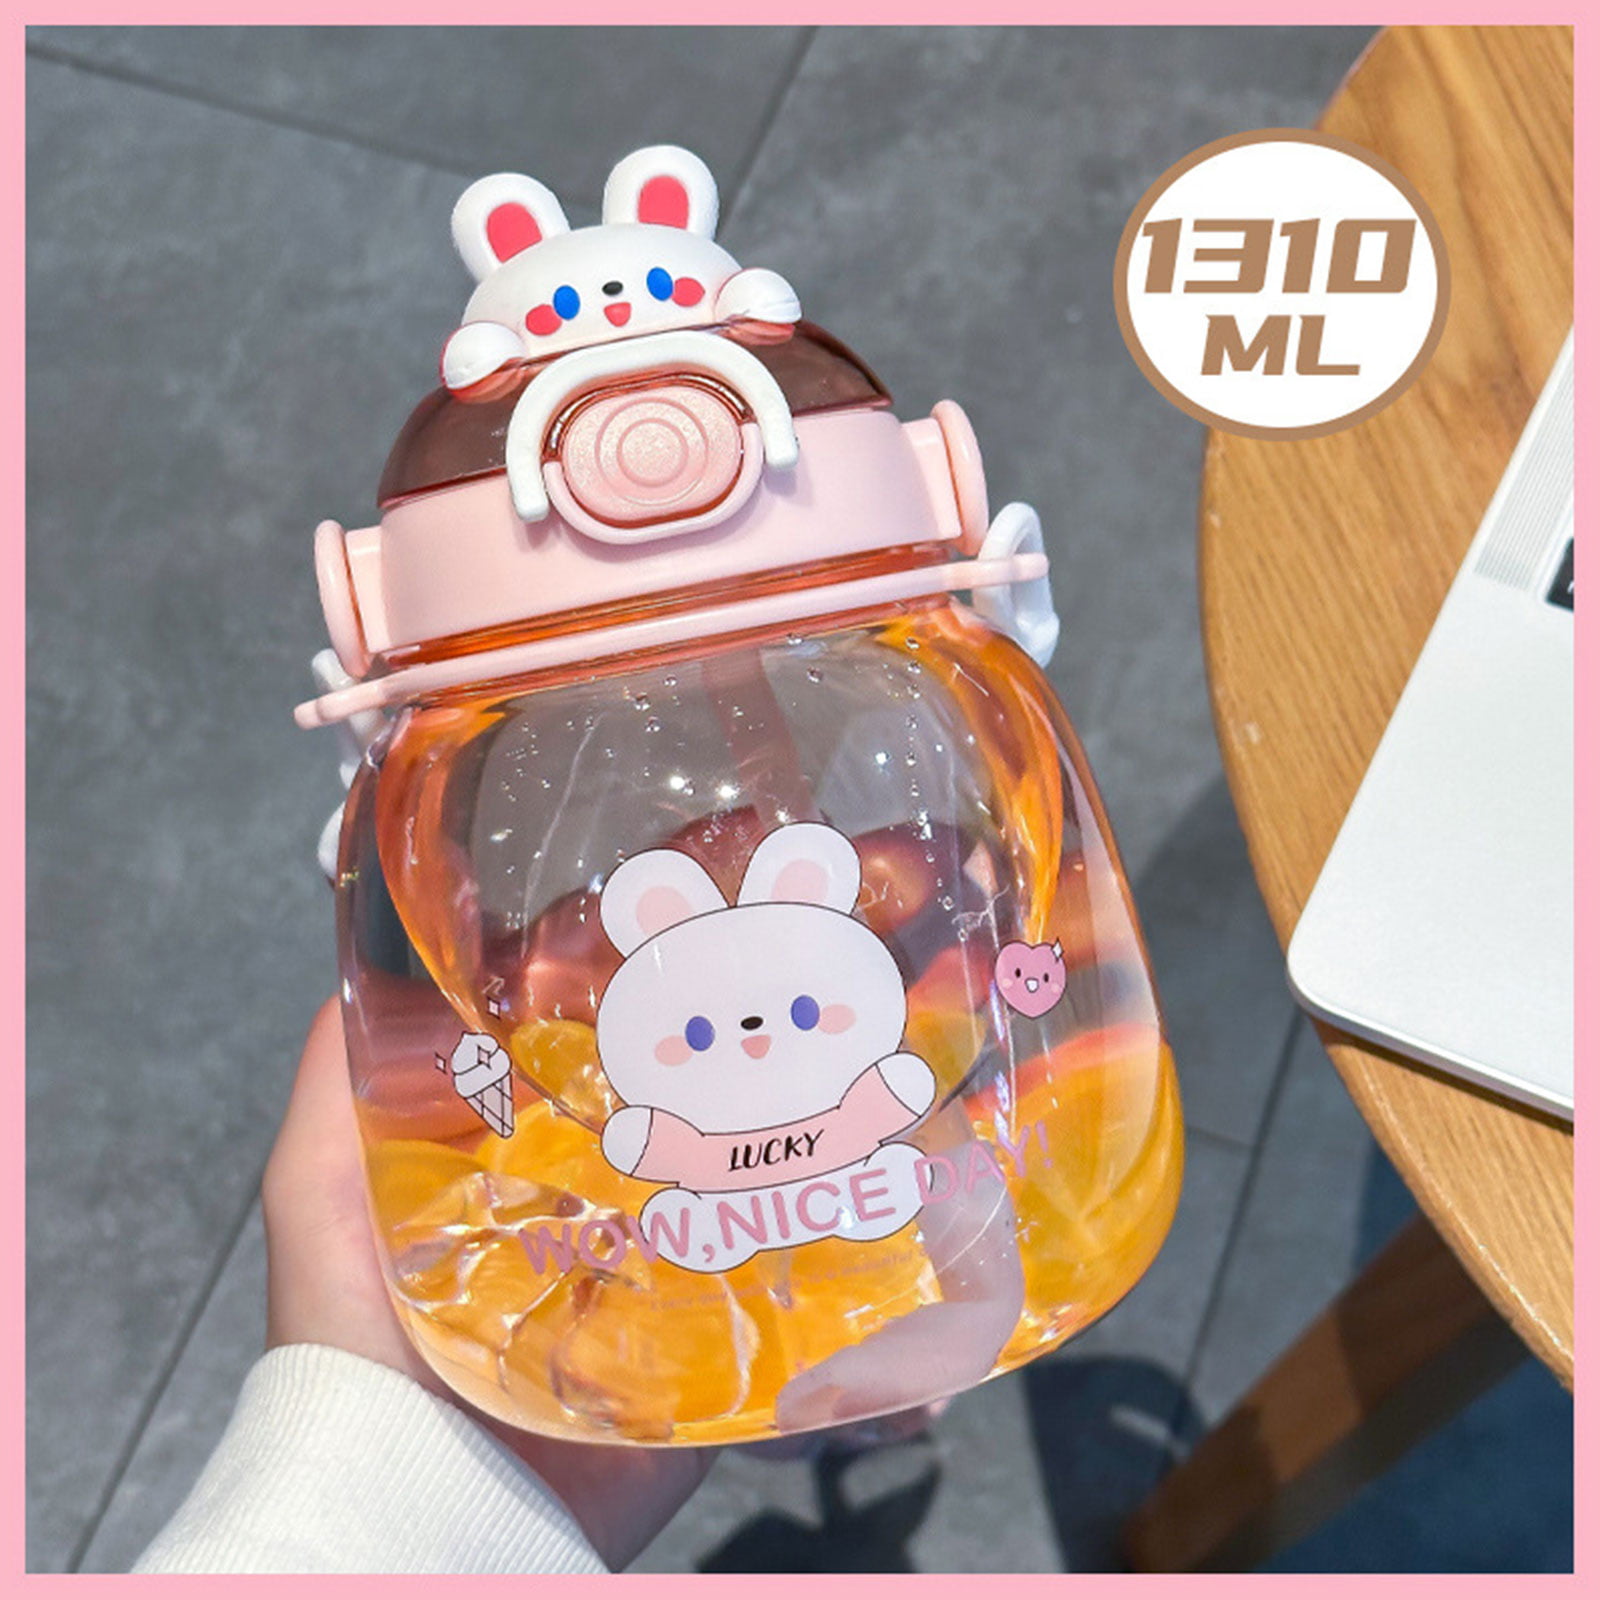 JOUDOO 460ml Summer Cool Water Bottle With Straw Prosted Glass Bottles Women  Girl Student Leakproof Drinkware Best Gift 35 201127 From Kong09, $14.77